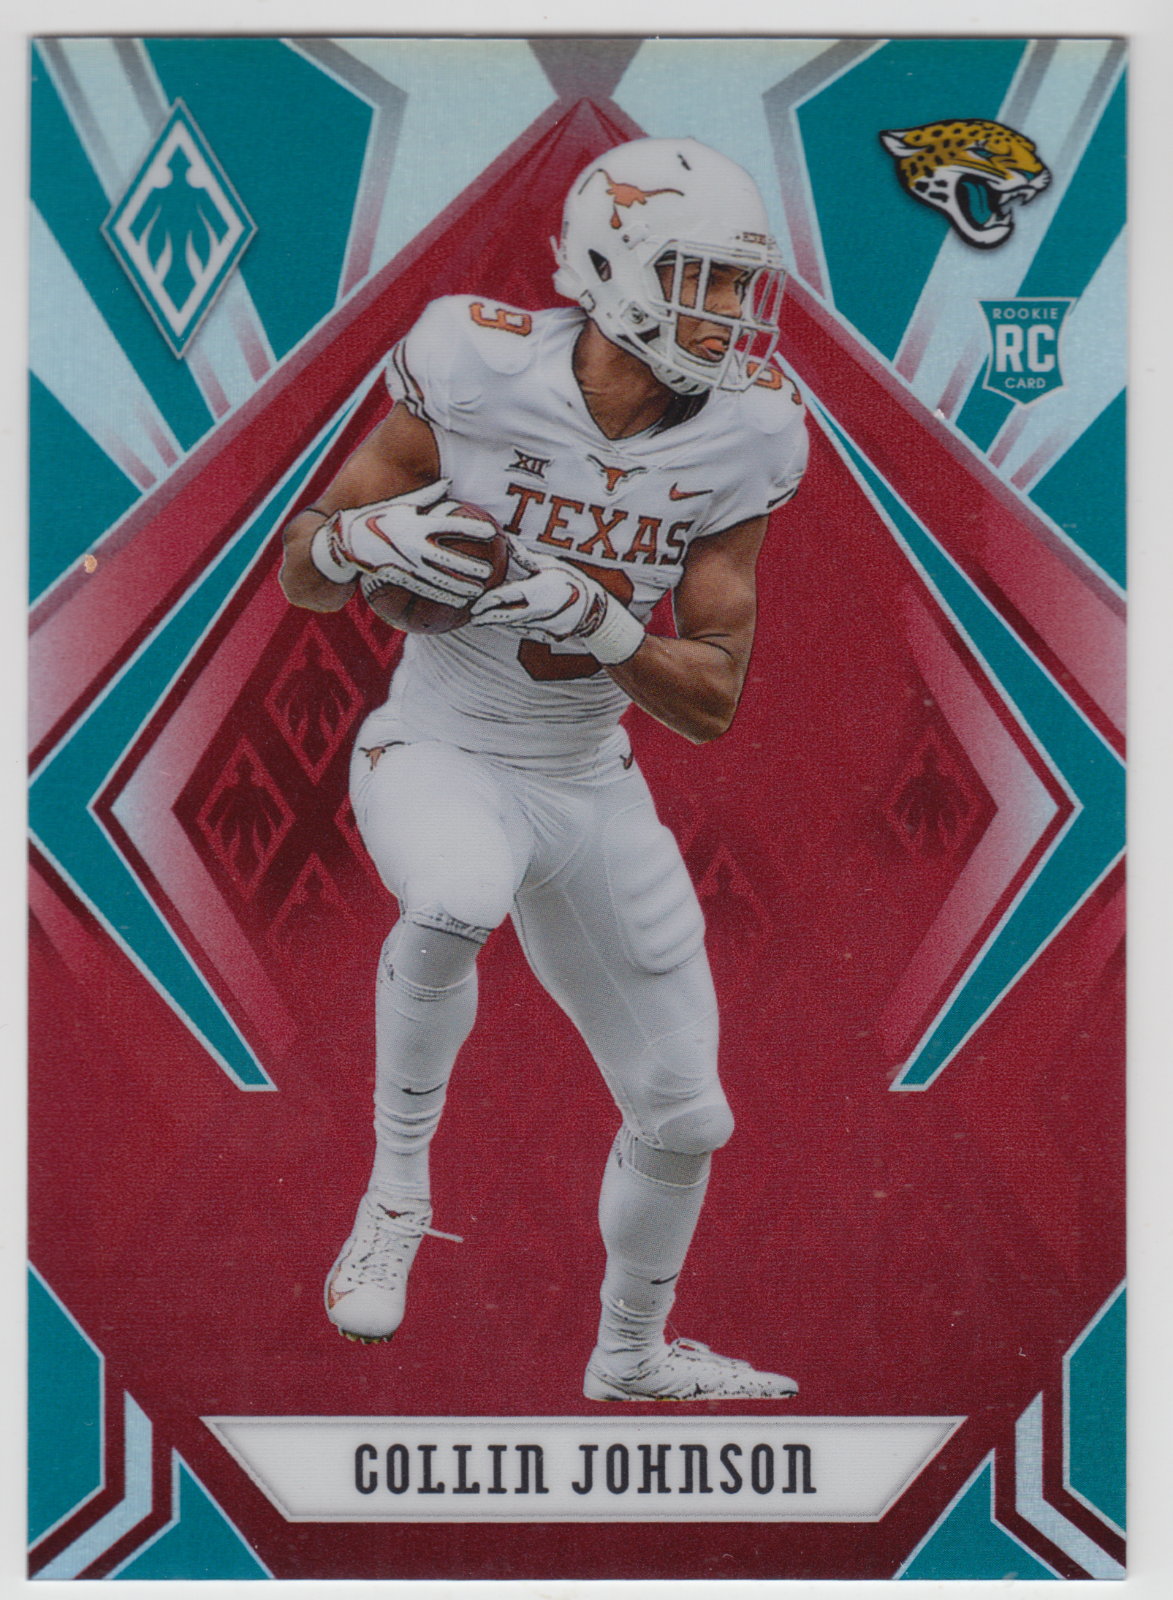 2020 PANINI PHOENIX COLLIN JOHNSON RC ROOKIE RED /299 CARD #174. rookie card picture